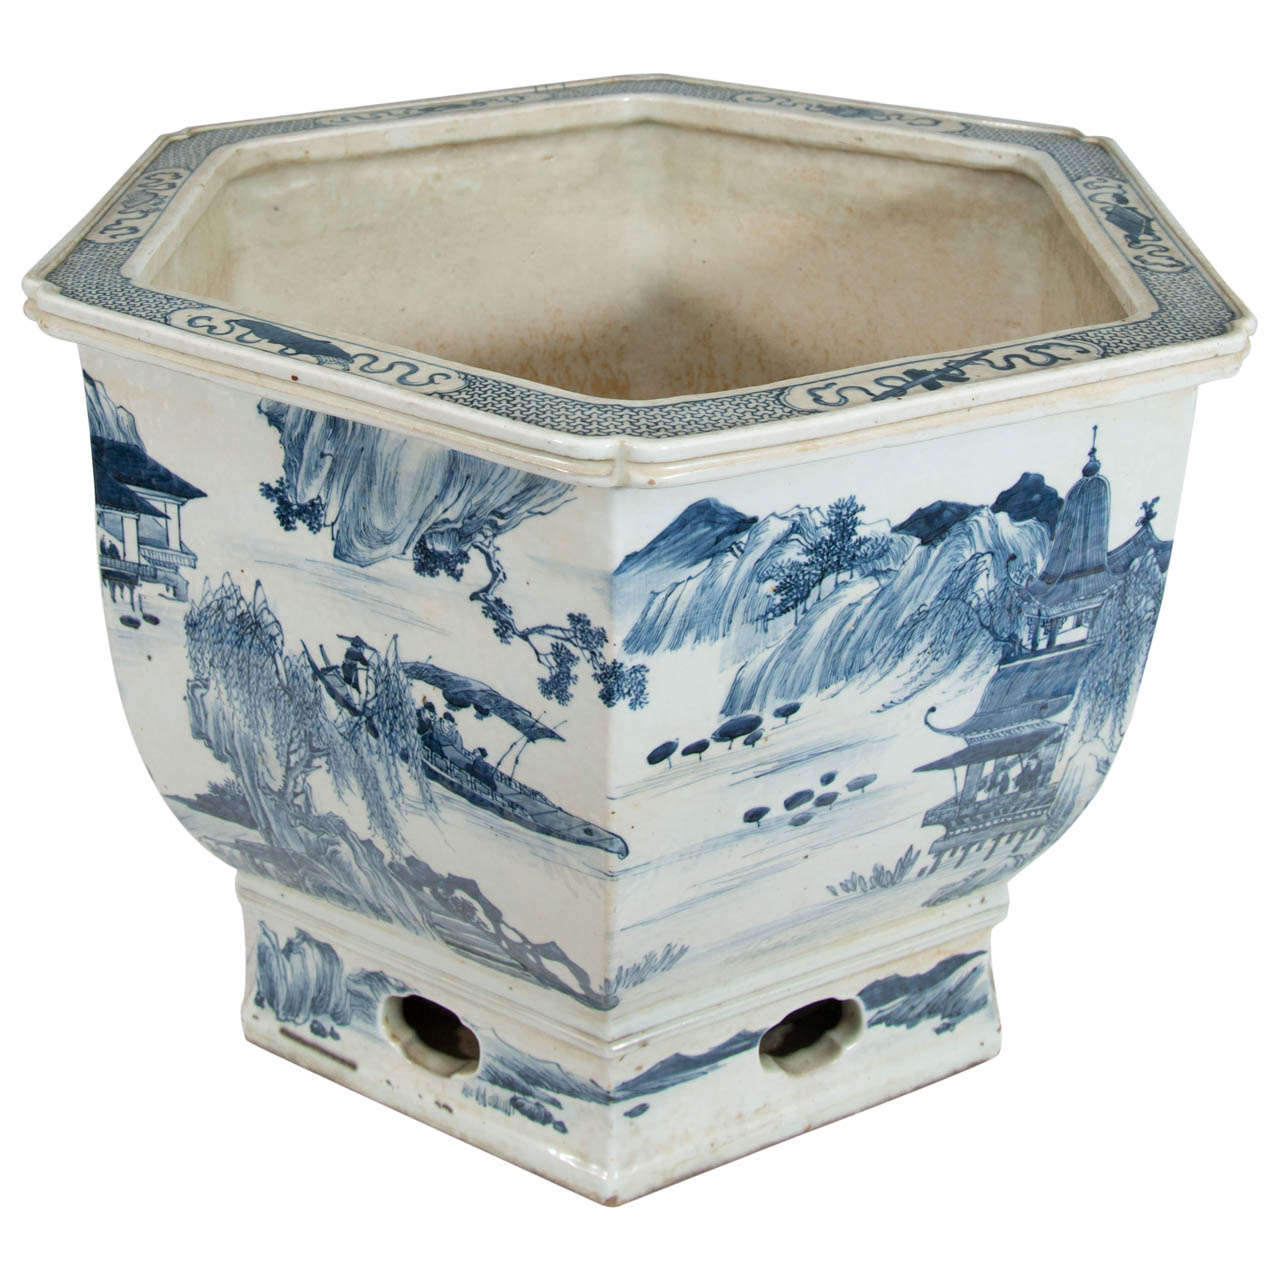 A Late 18th or Early 19th Century Chinese Porcelain Six-Sided Planter